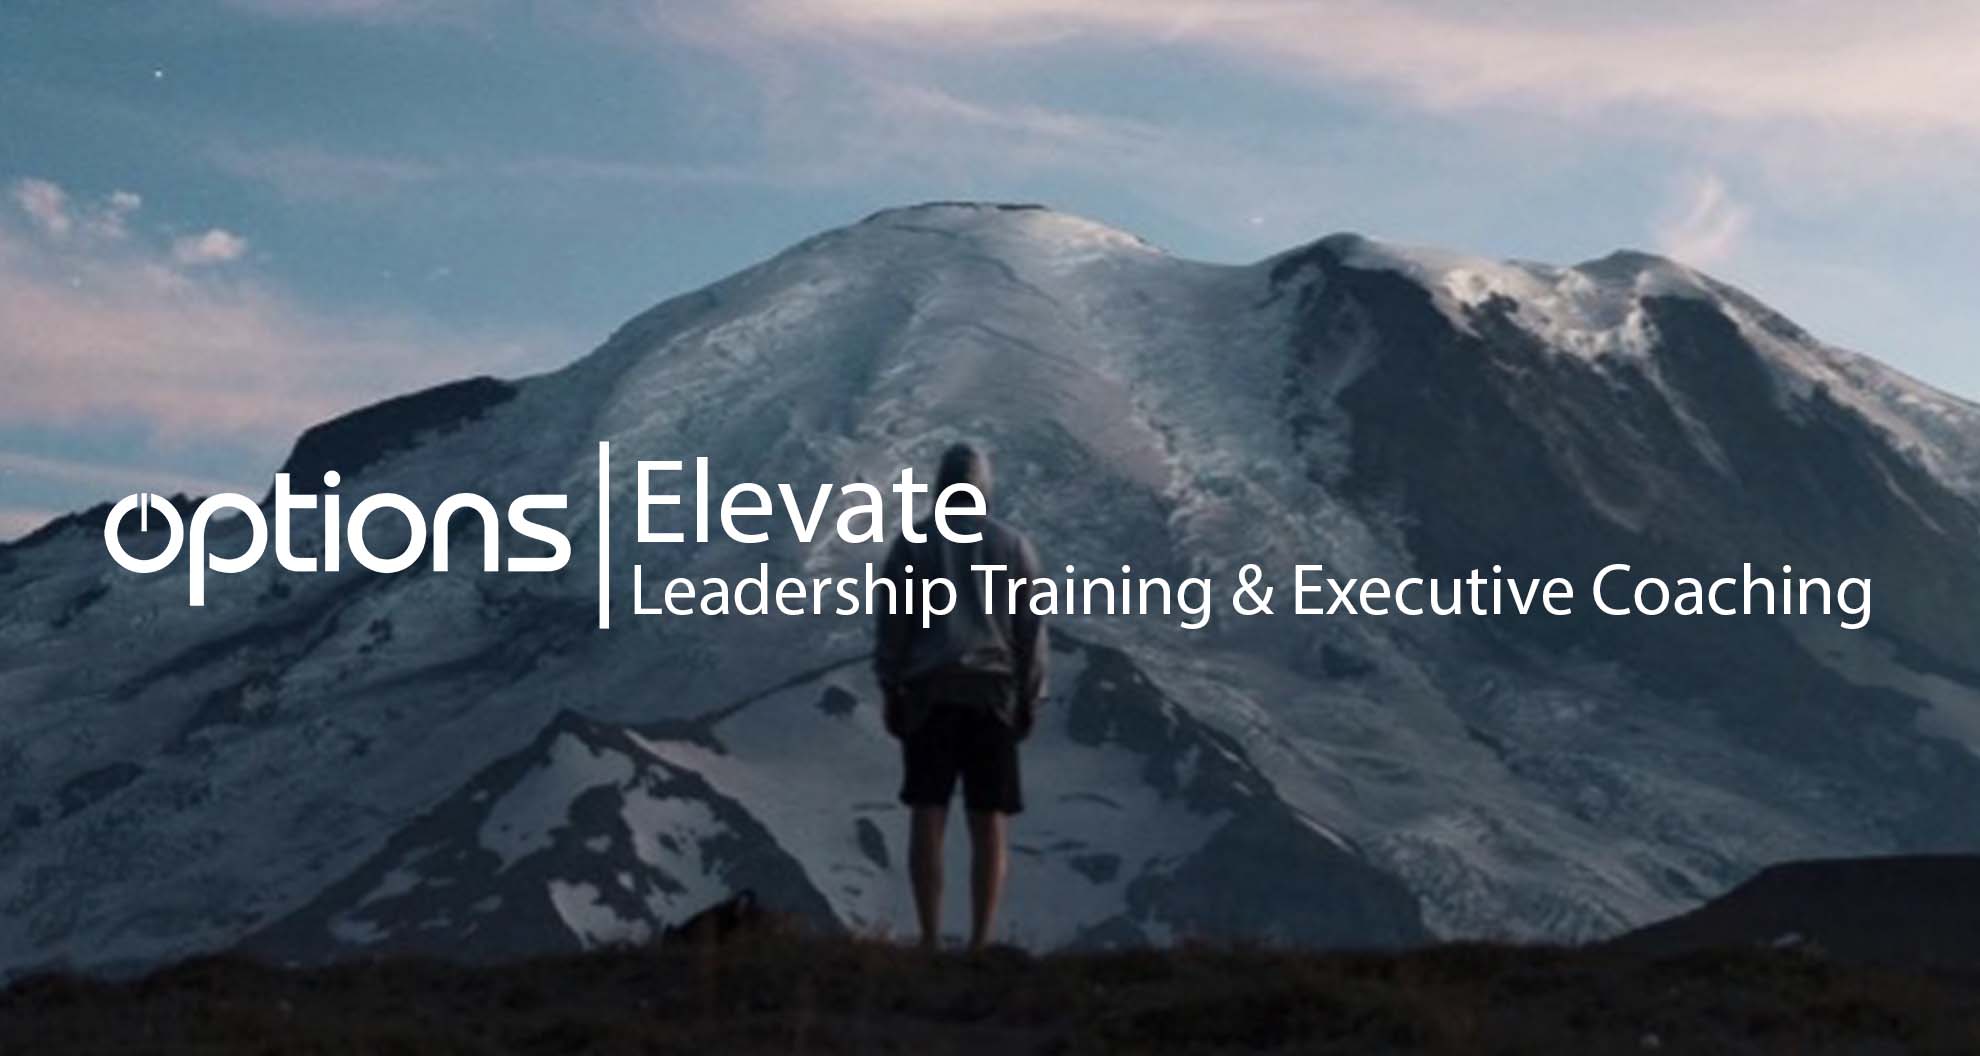 You are currently viewing Options Elevate – Leadership Training & Executive Coaching